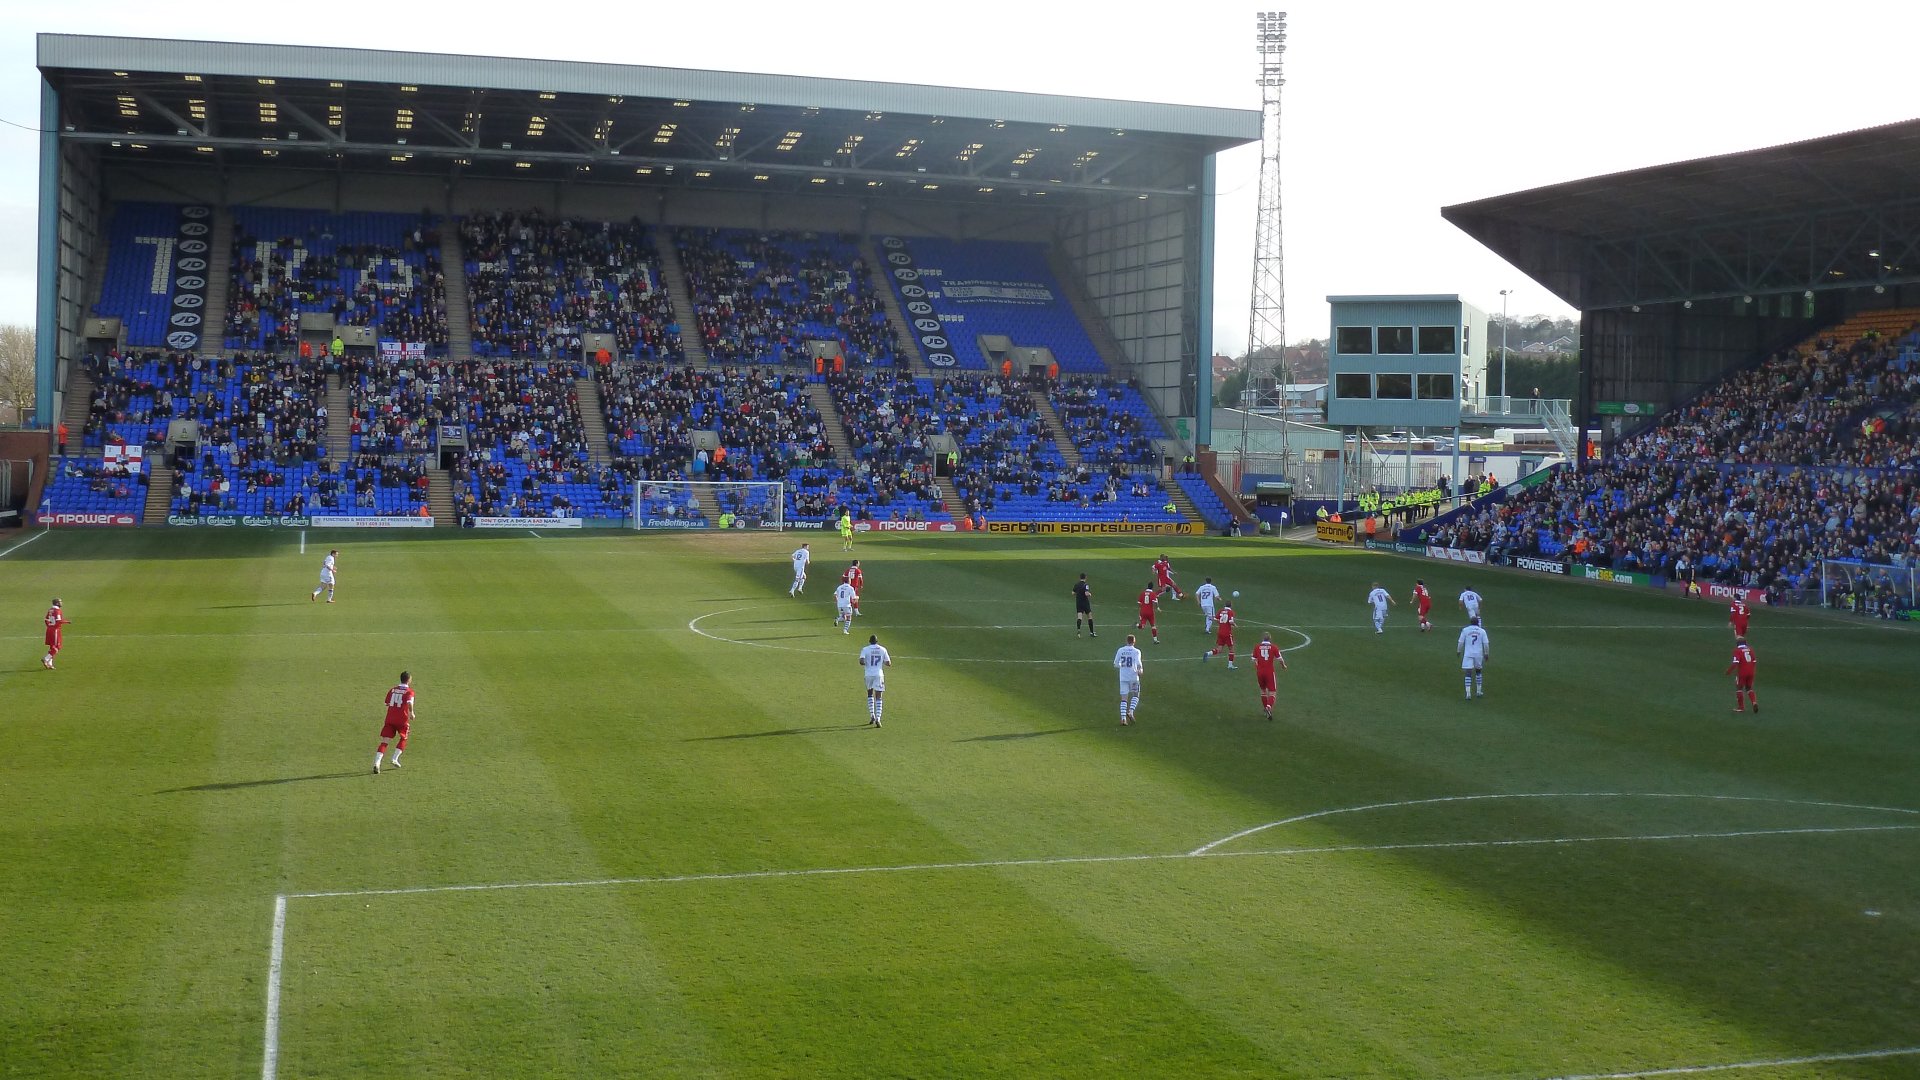 Tranmere Rovers F.C. Wallpapers